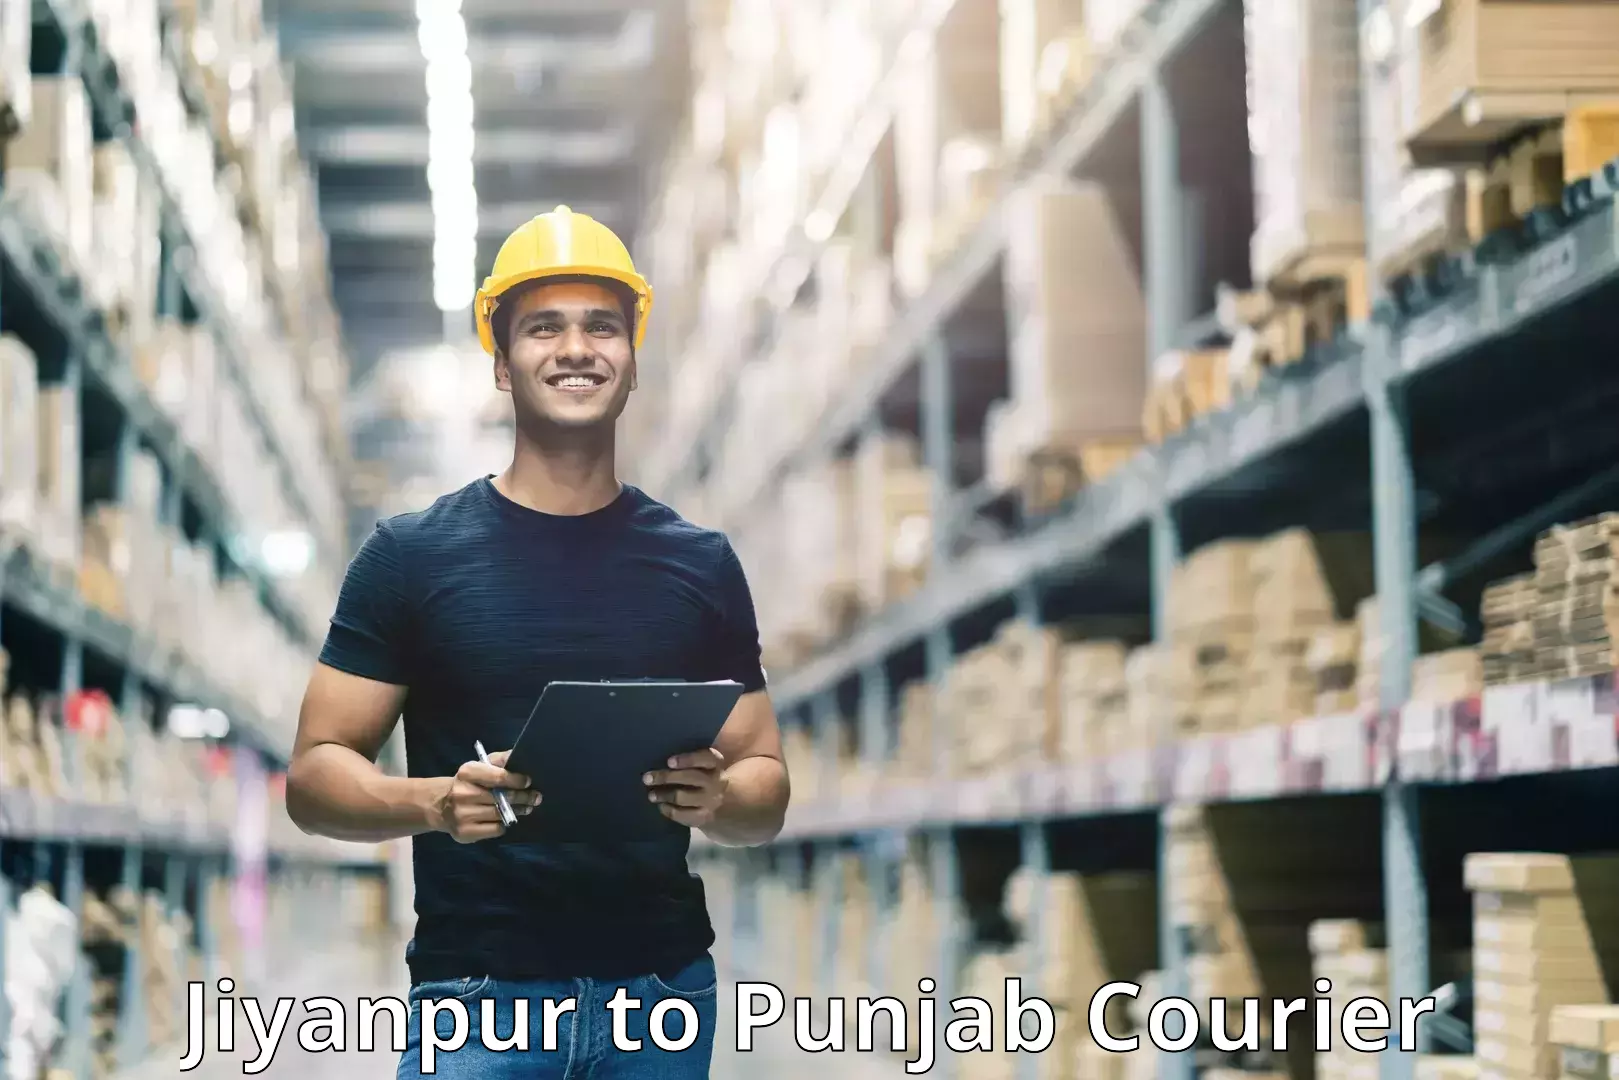 Online package tracking Jiyanpur to Patiala